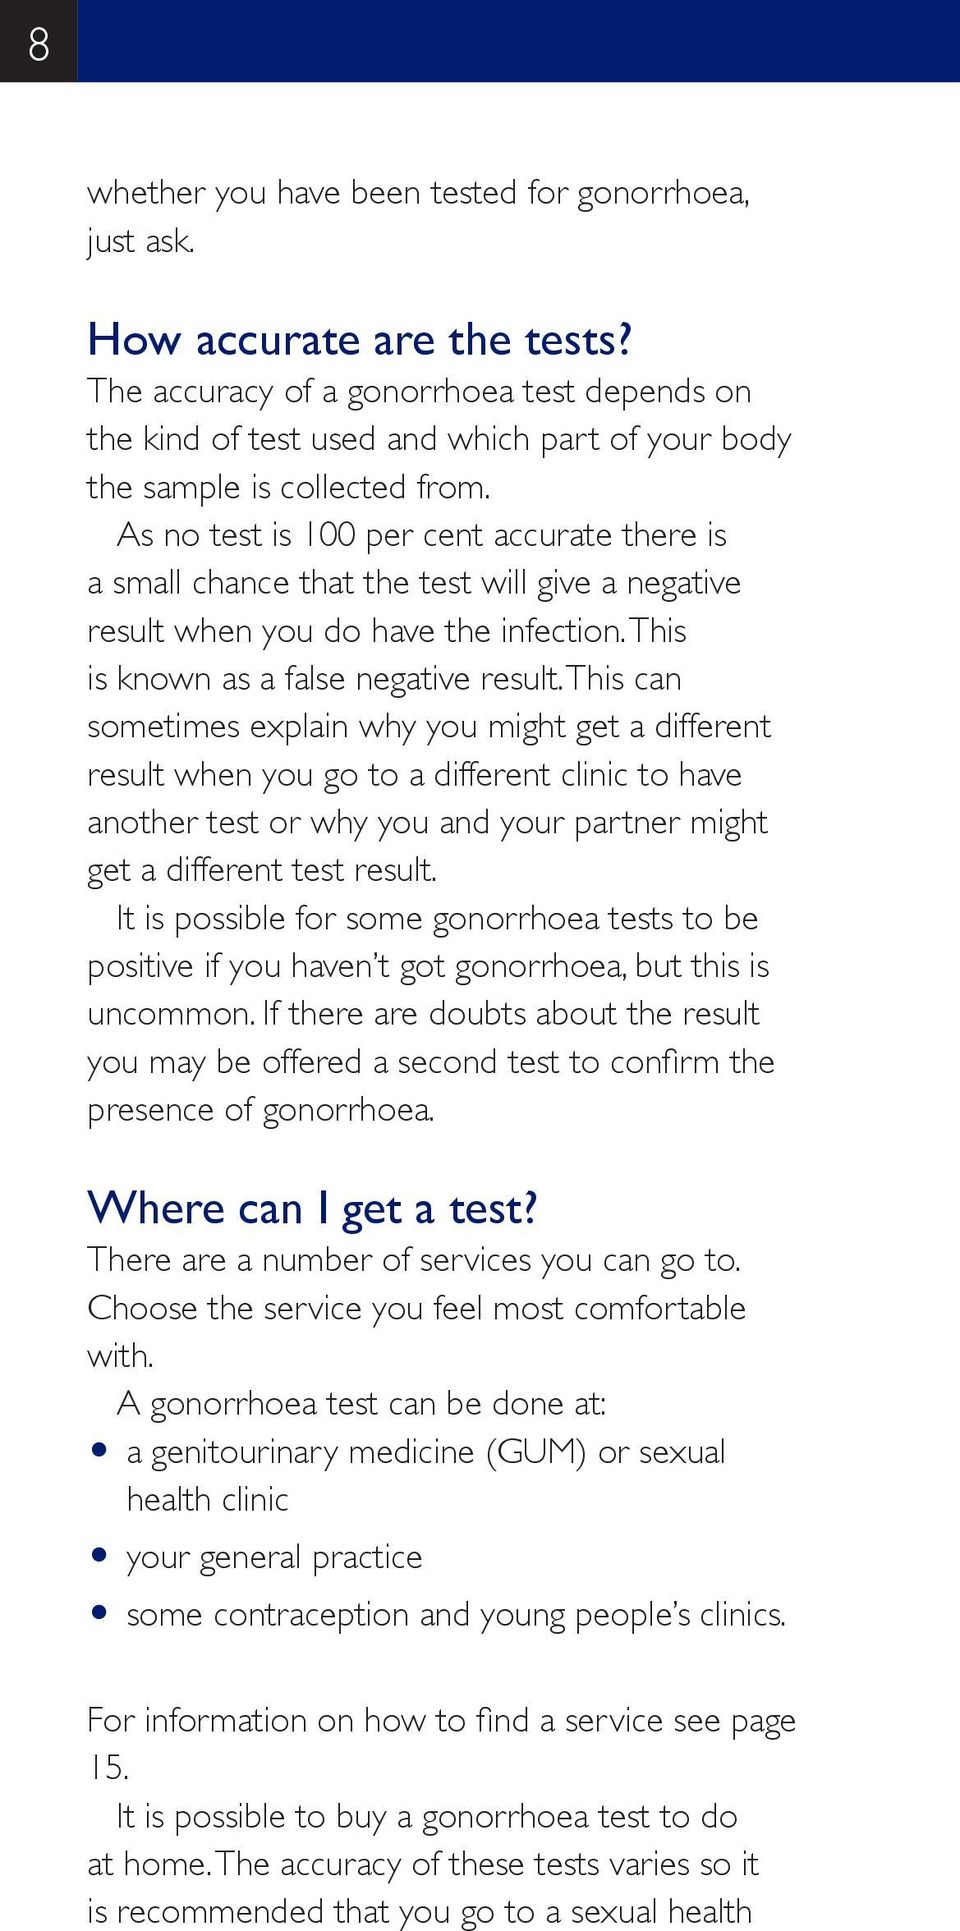 As no test is 100 per cent accurate there is a small chance that the test will give a negative result when you do have the infection. This is known as a false negative result.